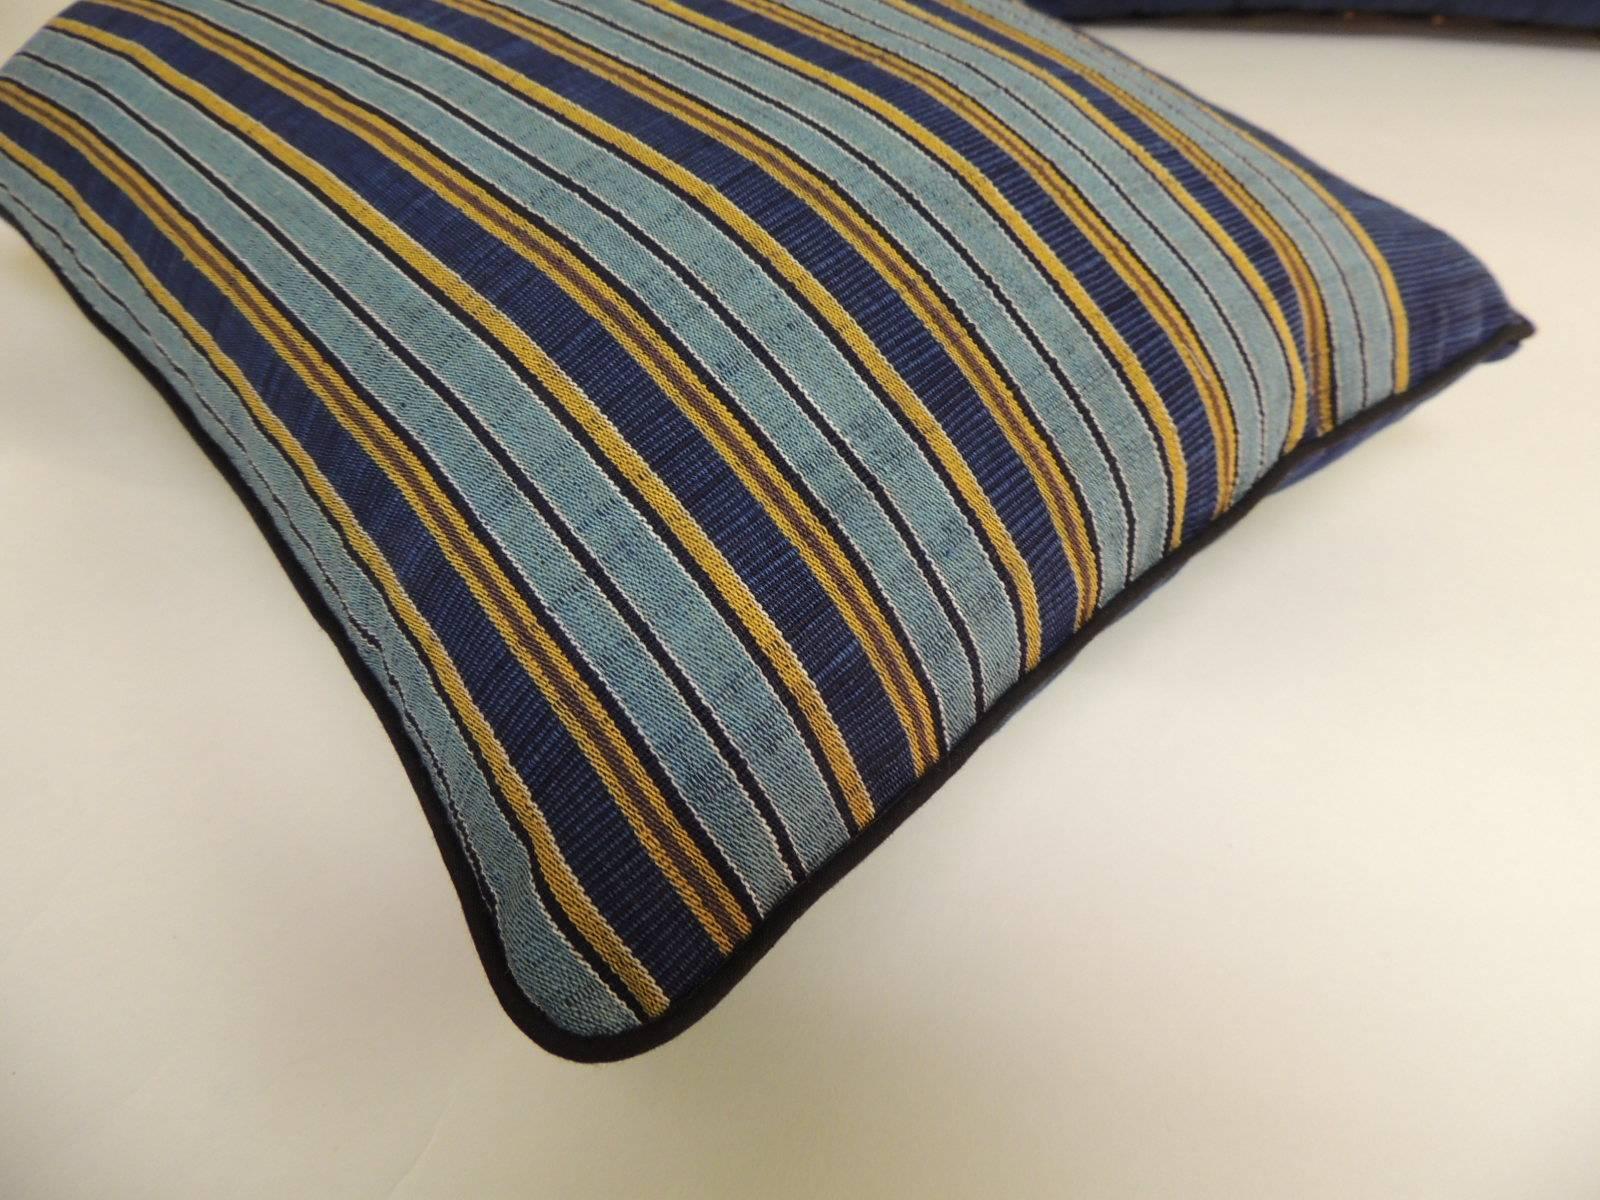 Hand-Crafted Pair of Vintage Japanese Blue and Gold Obi Stripes Decorative Lumbar Pillows